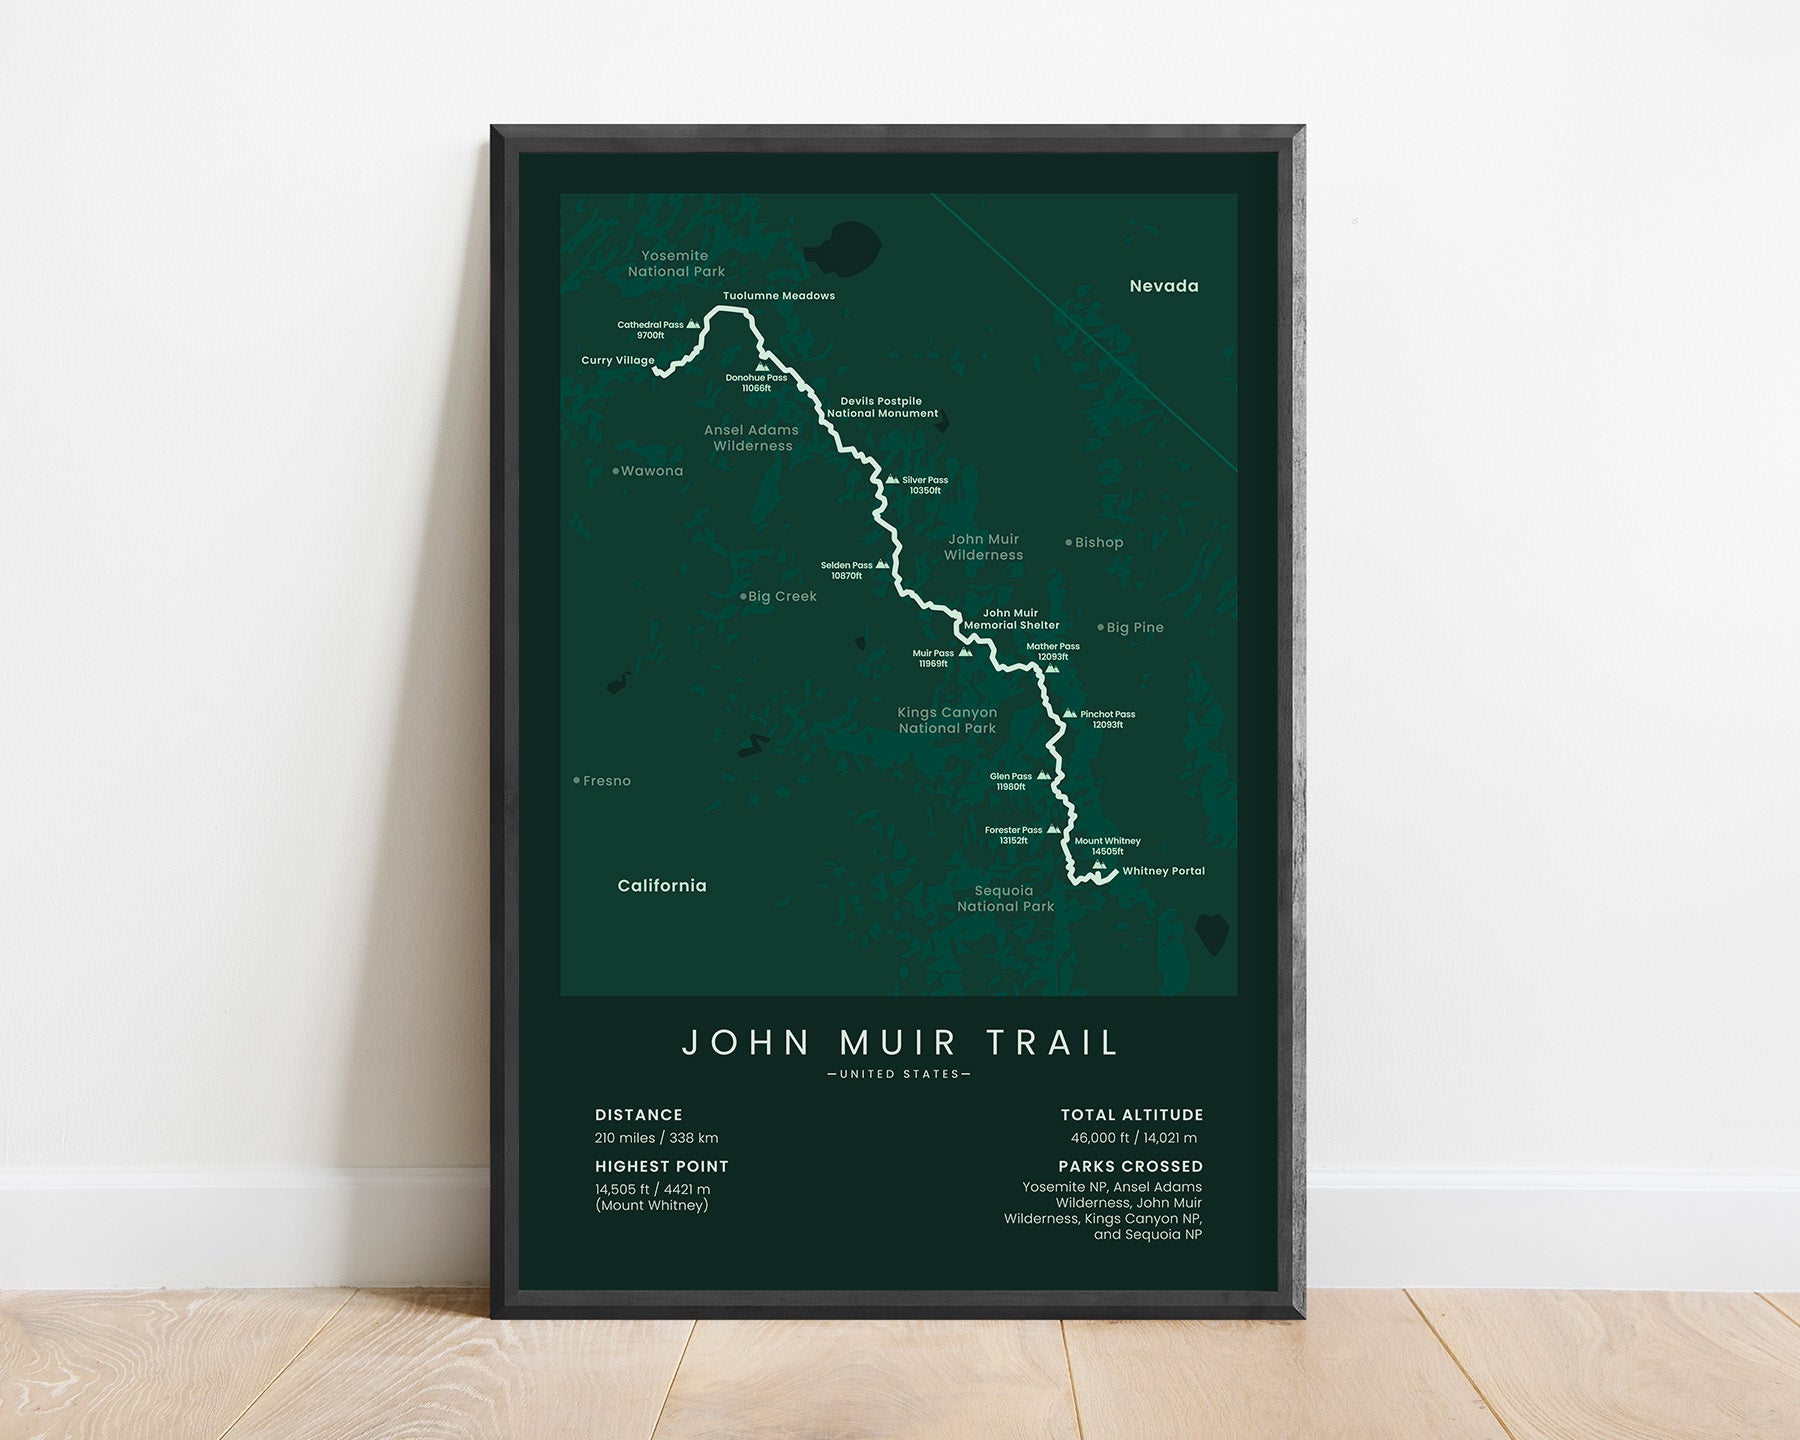 John Muir Track Cross-Country Hike (also joining the Pacific Crest Trail) minimalist wall art with green background